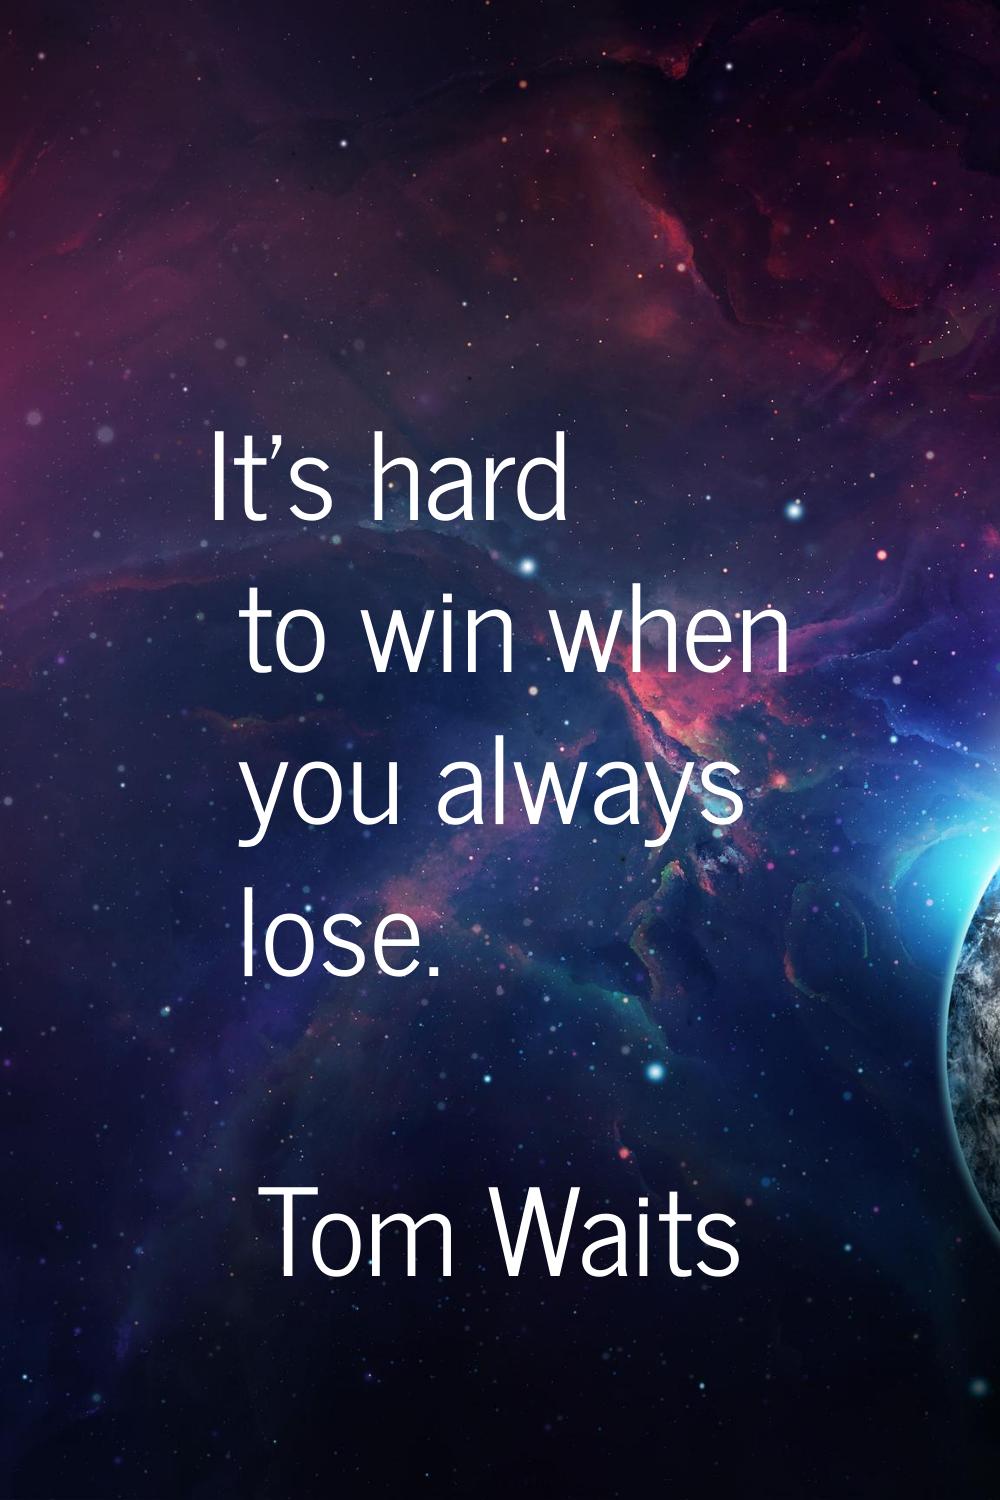 It's hard to win when you always lose.